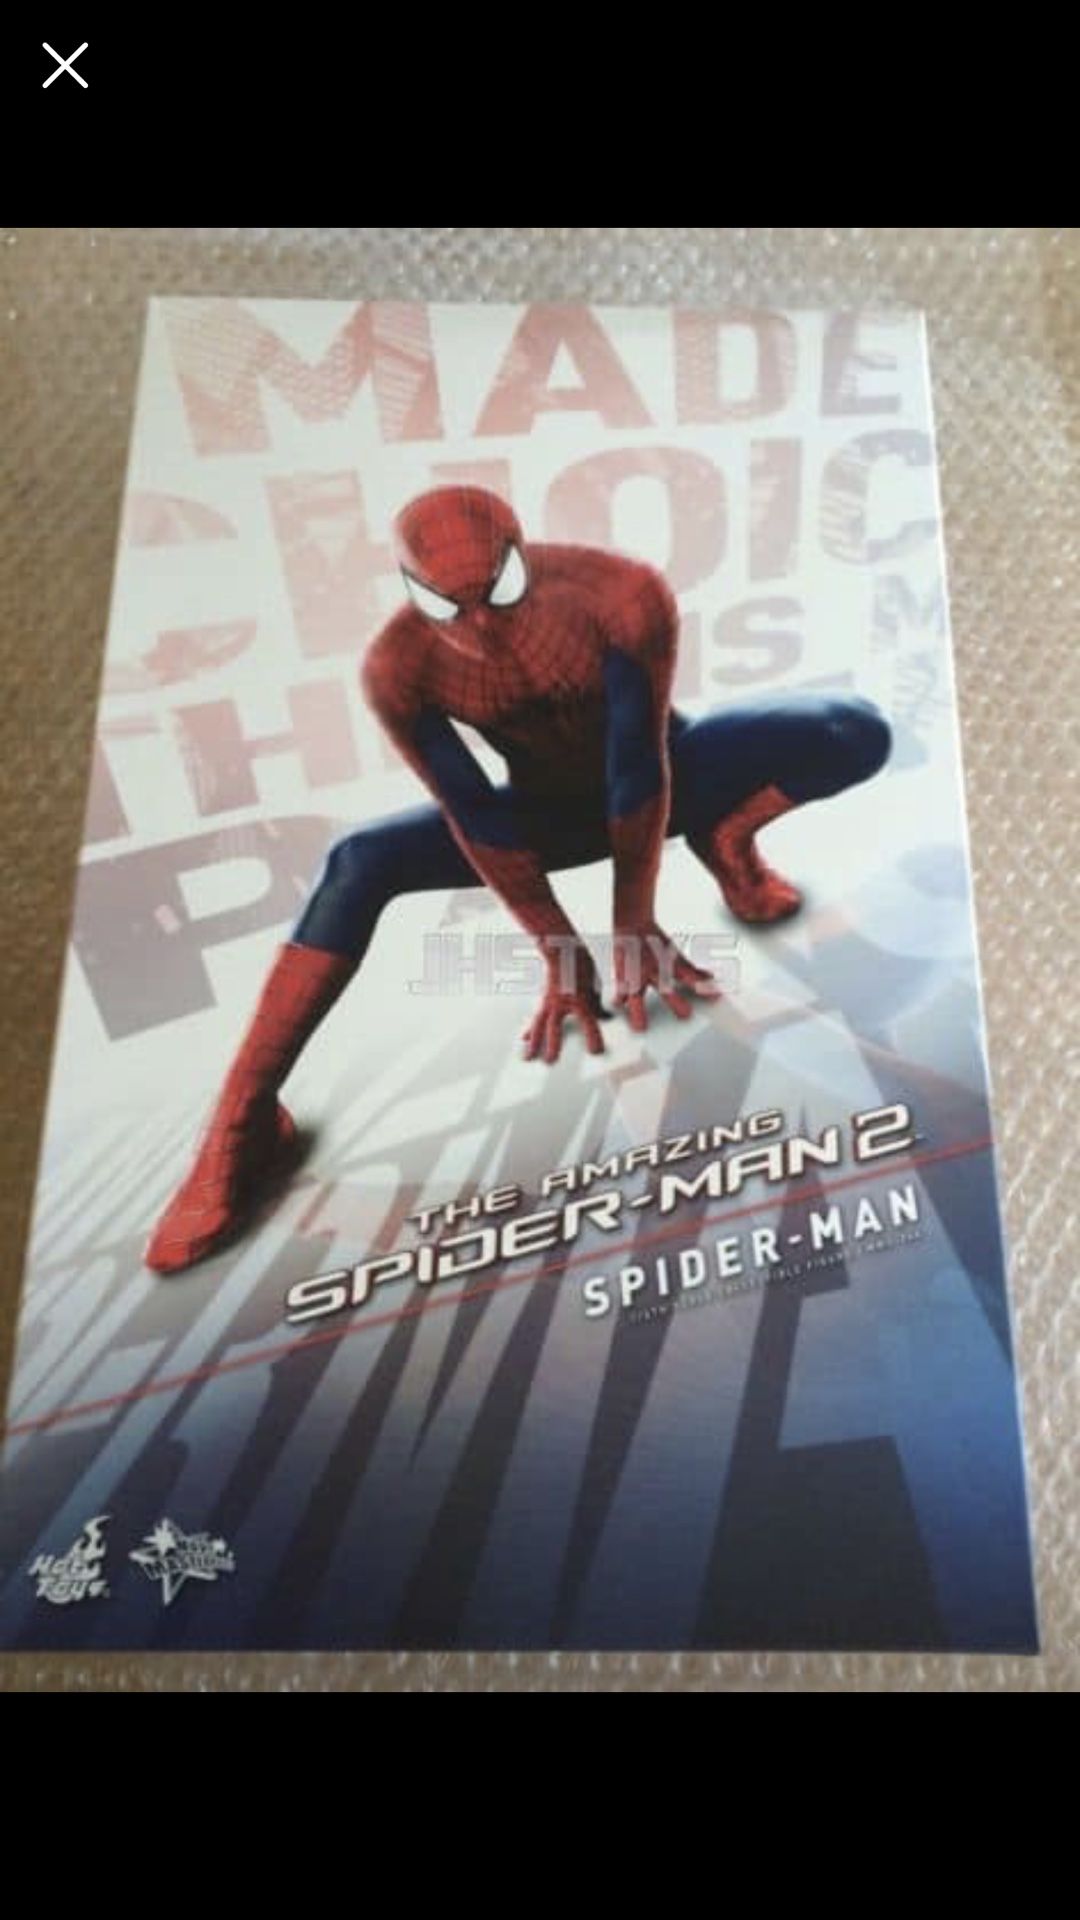 Hot toys Amazing spider-man 2 (spiderman) 1/6th scale figure